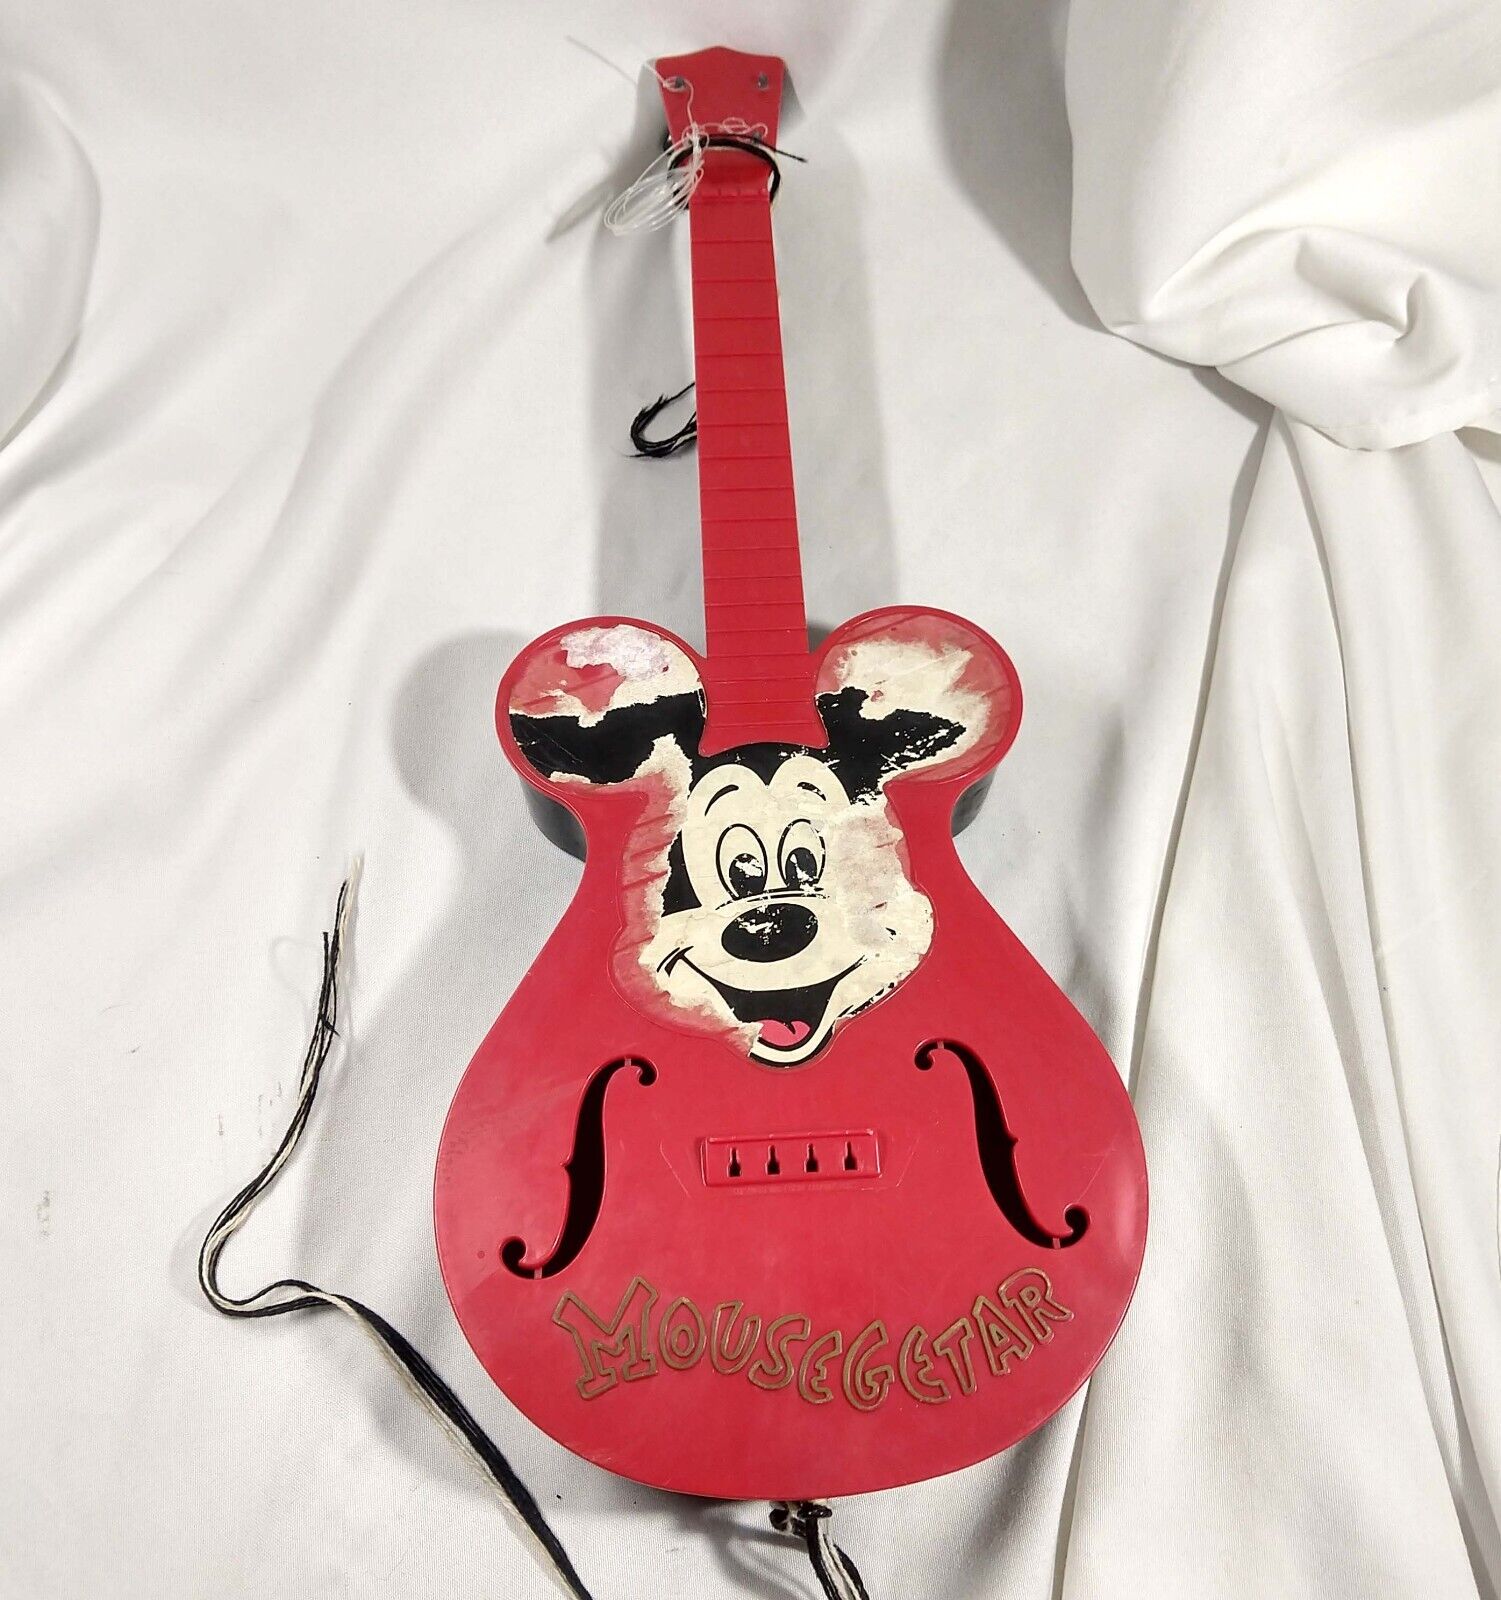 Mickey Mouse MOUSEGETAR Vintage Childs Guitar hollow body original strap 1950s